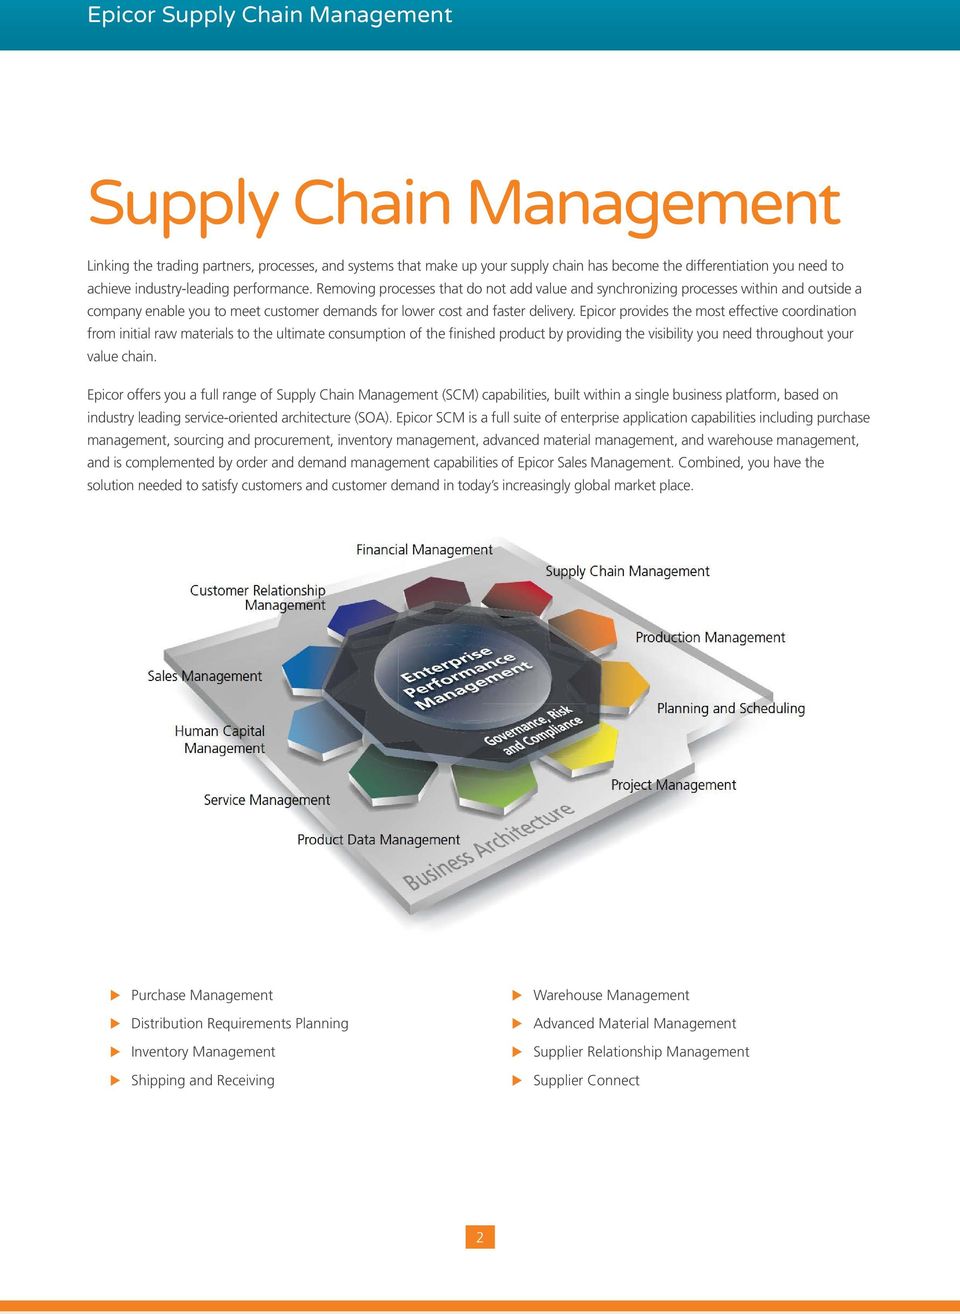 Epicor provides the most effective coordination from initial raw materials to the ultimate consumption of the finished product by providing the visibility you need throughout your value chain.